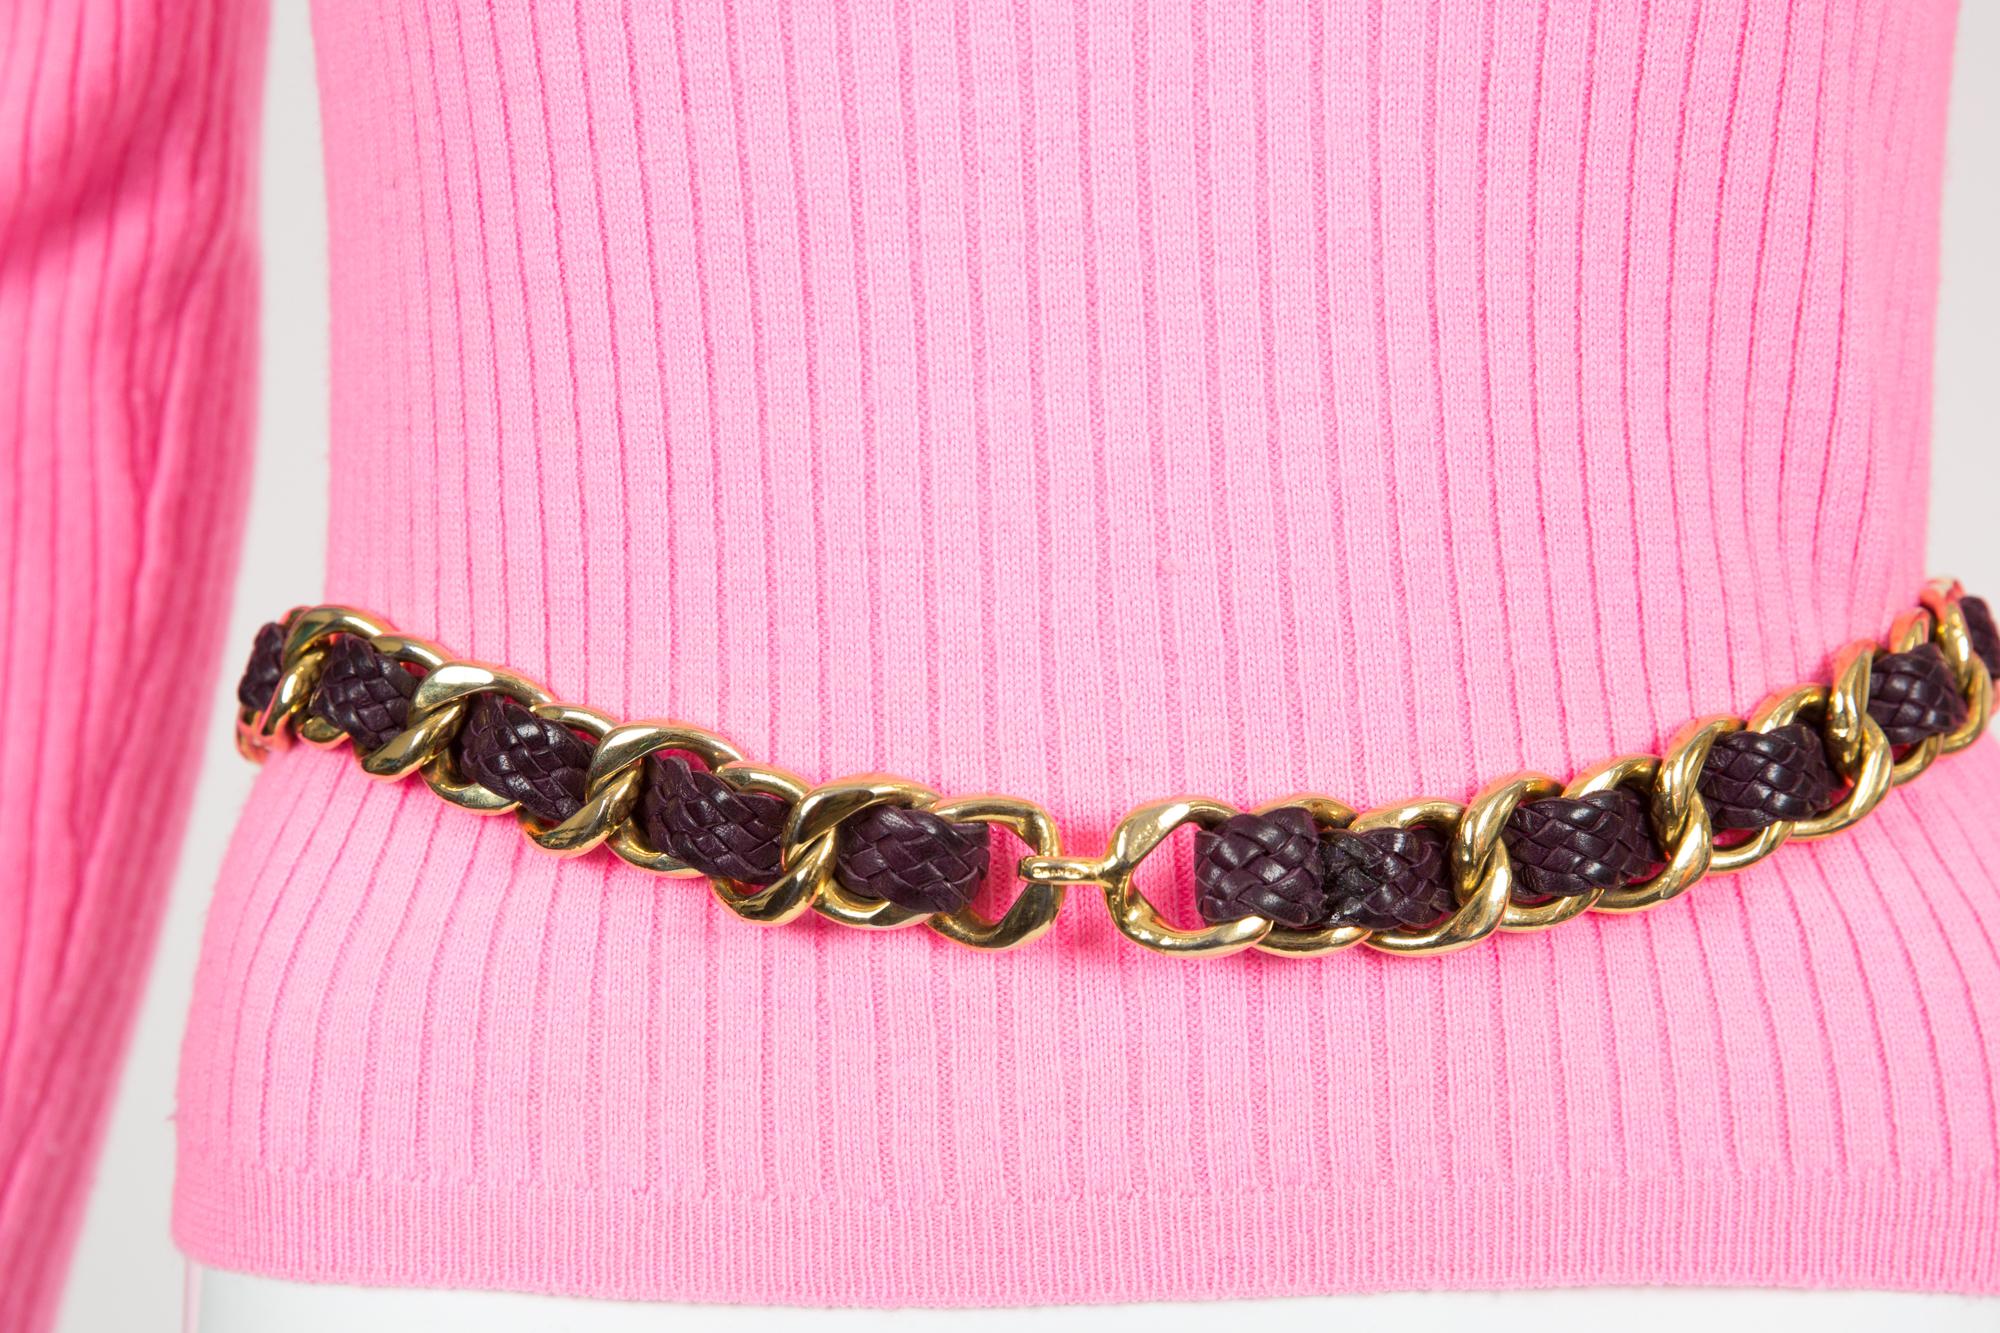 Chanel Gold chain belt plum leather Size:75 Gold-tone chain belt from Chanel Pre-Owned featuring a plum braided leather detail a front hook closure, Chanel logo pitted on the front hook. 
Estimated Belt size: 75
Circa 1985/95s. 
Length 32.6in.